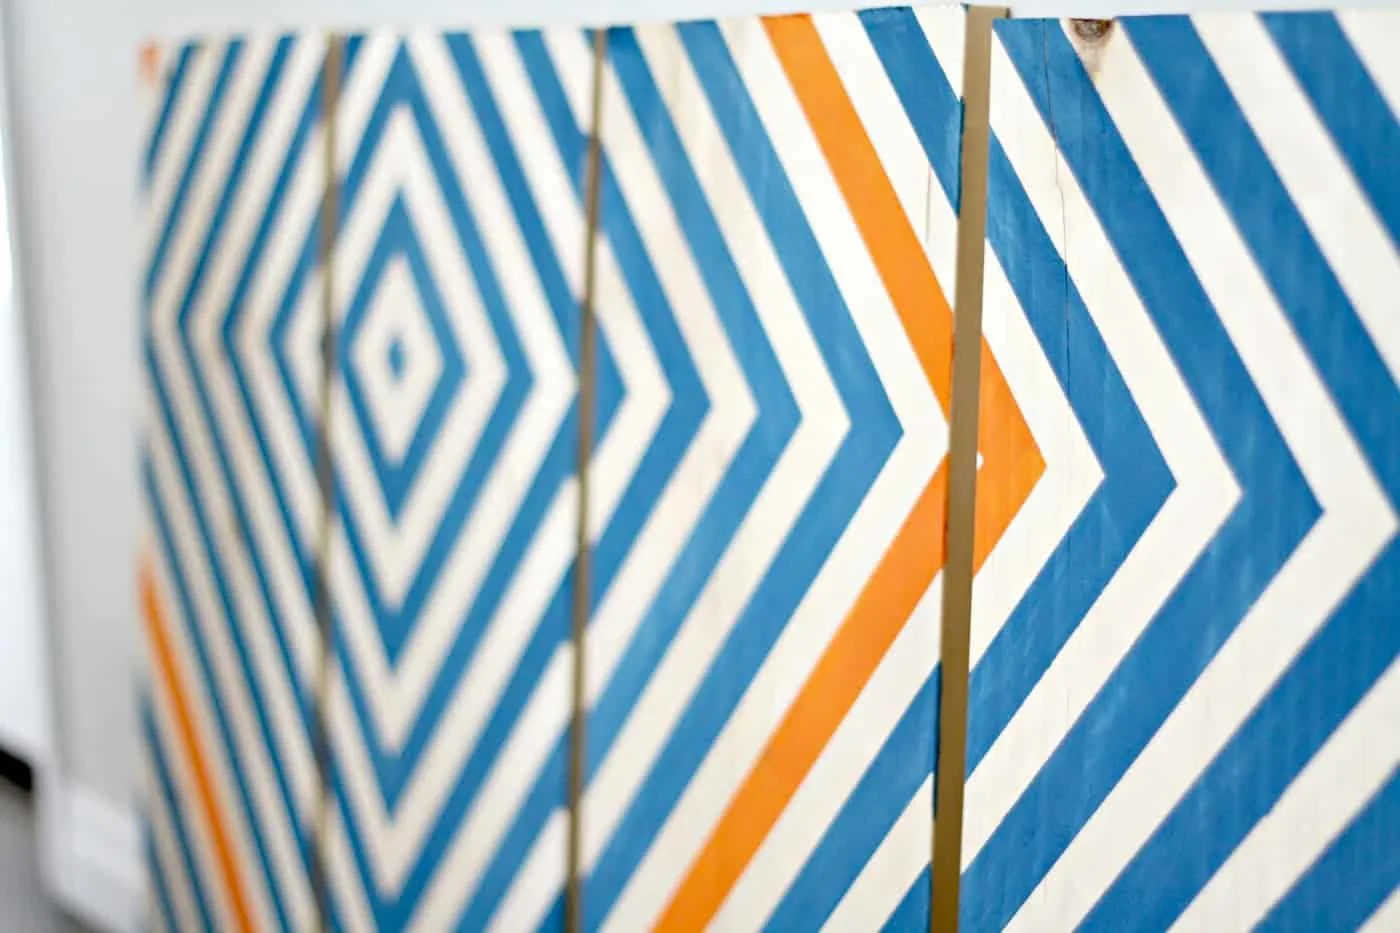 diy wood art with a geometric painted design